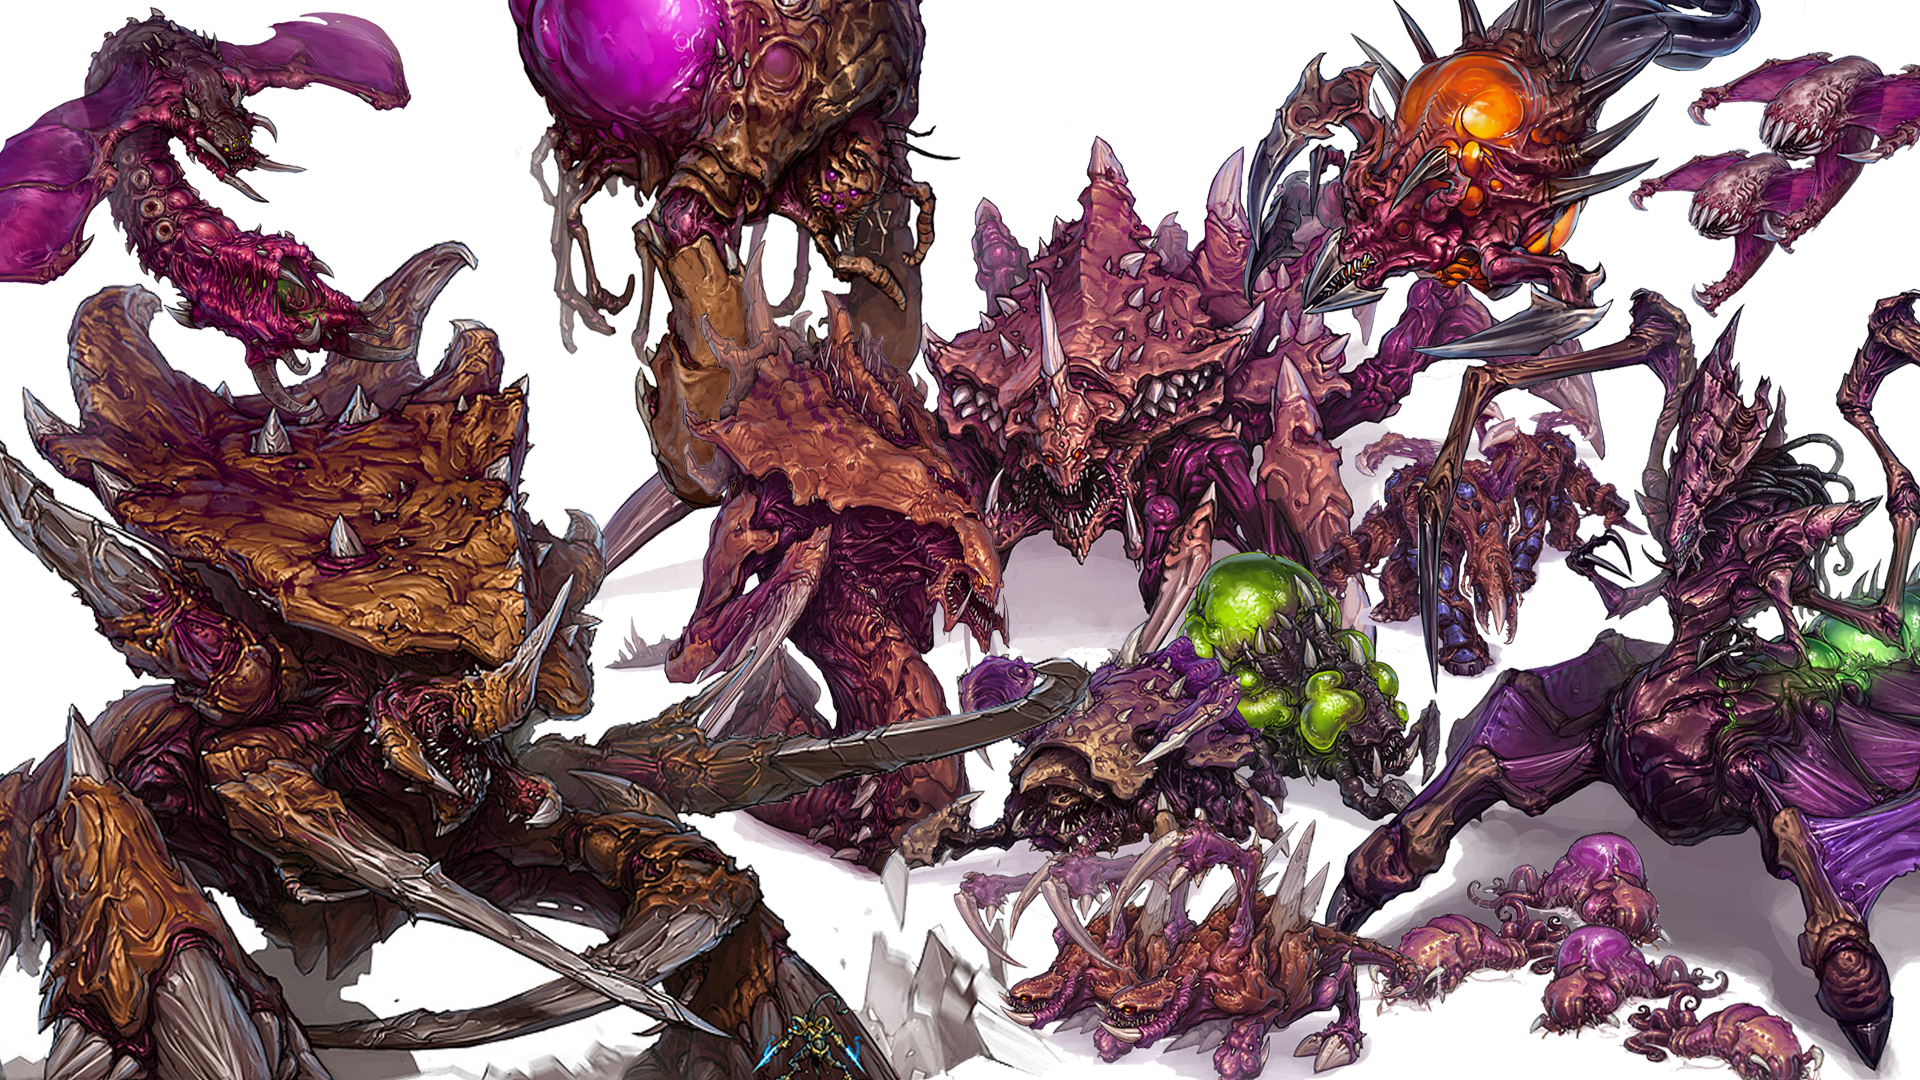 Free Download Zerg Army Wallpapers Zerg Army Myspace Backgrounds Images, Photos, Reviews